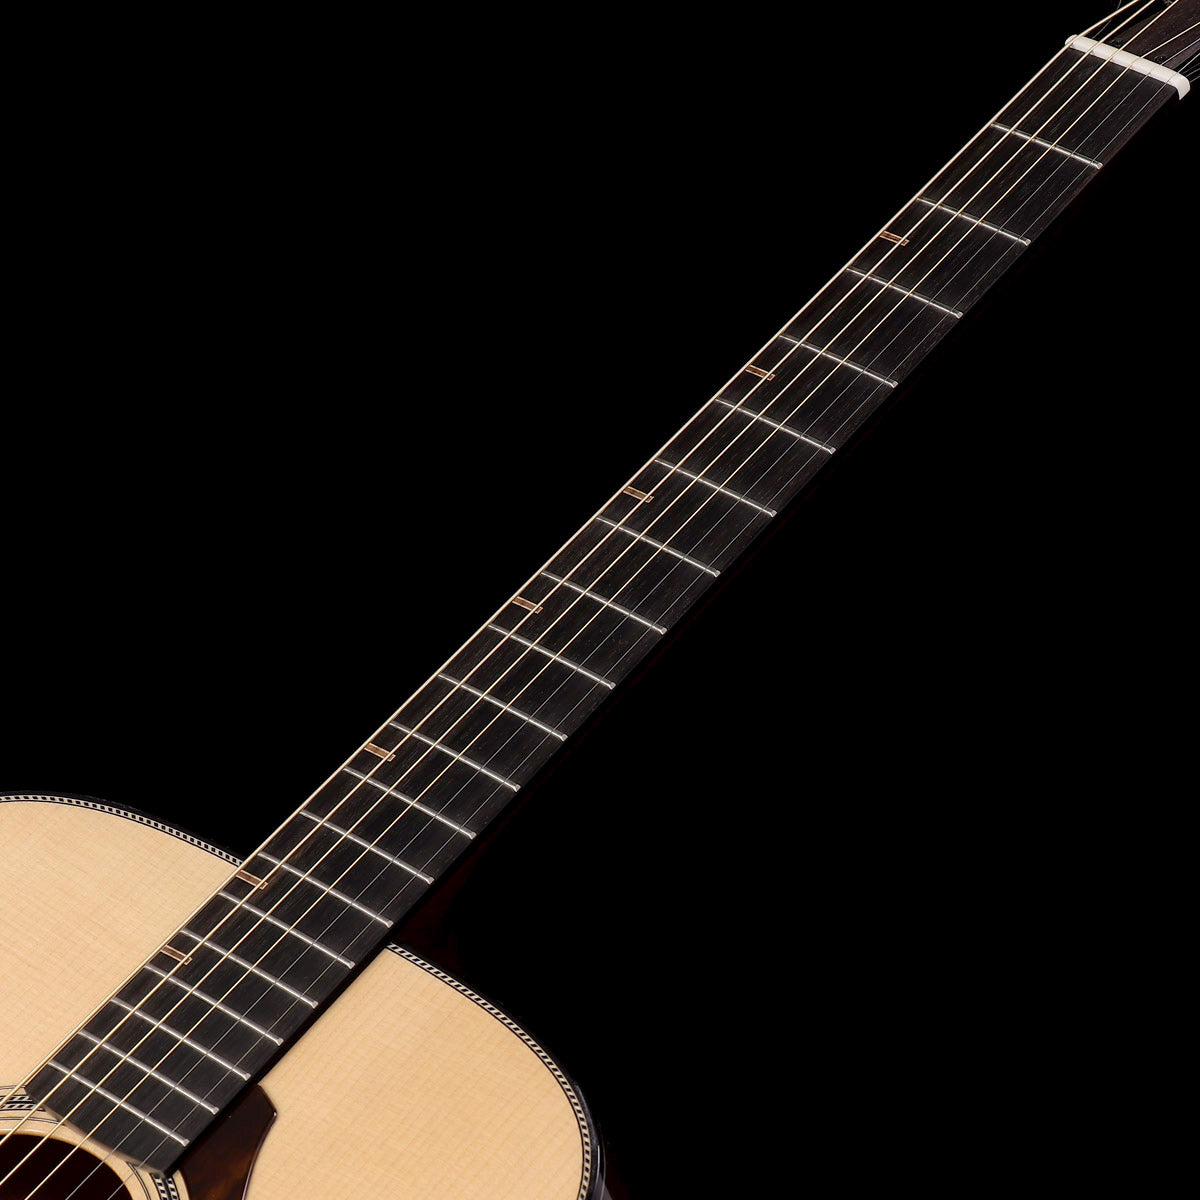 [SN IJN013a] YAMAHA / FG9M [Made in Japan/][Real Image] Yamaha Acoustic Guitar Acoustic Guitar [Long-term display outlet]. [08]